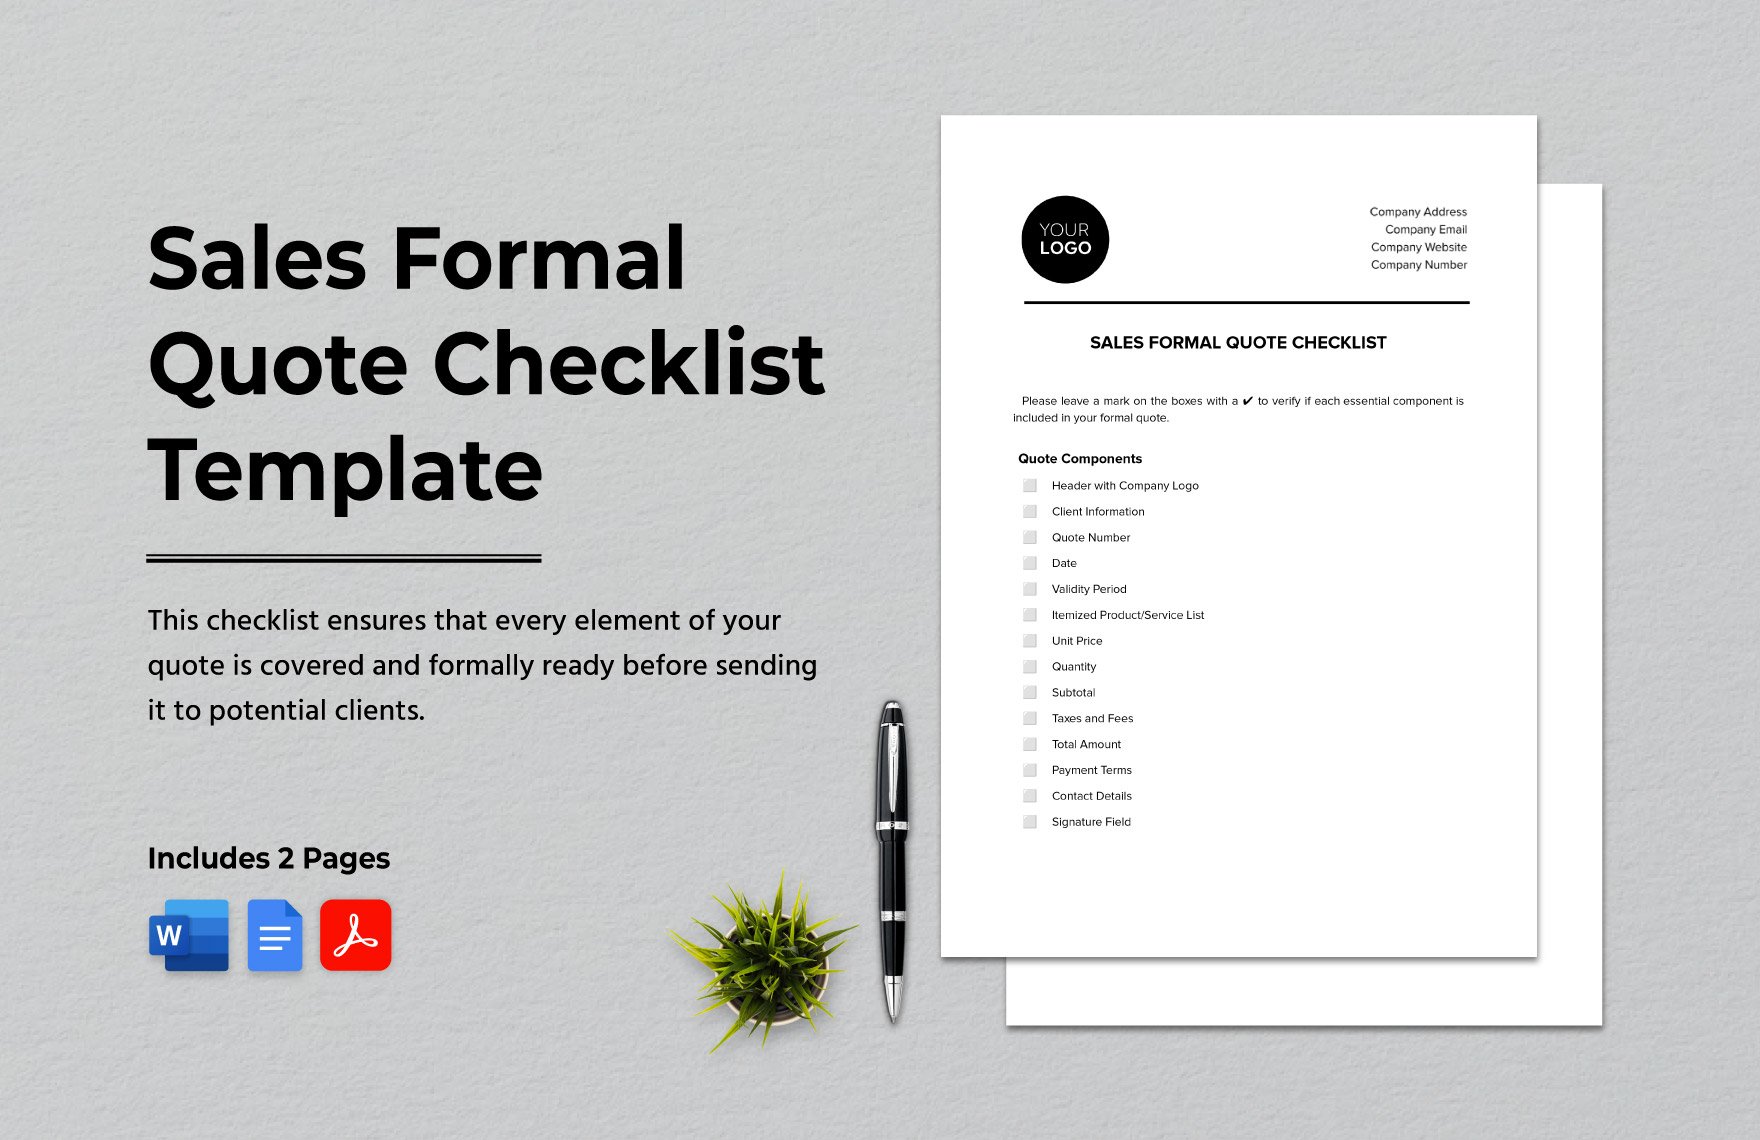 Sales Formal Quote Checklist Template